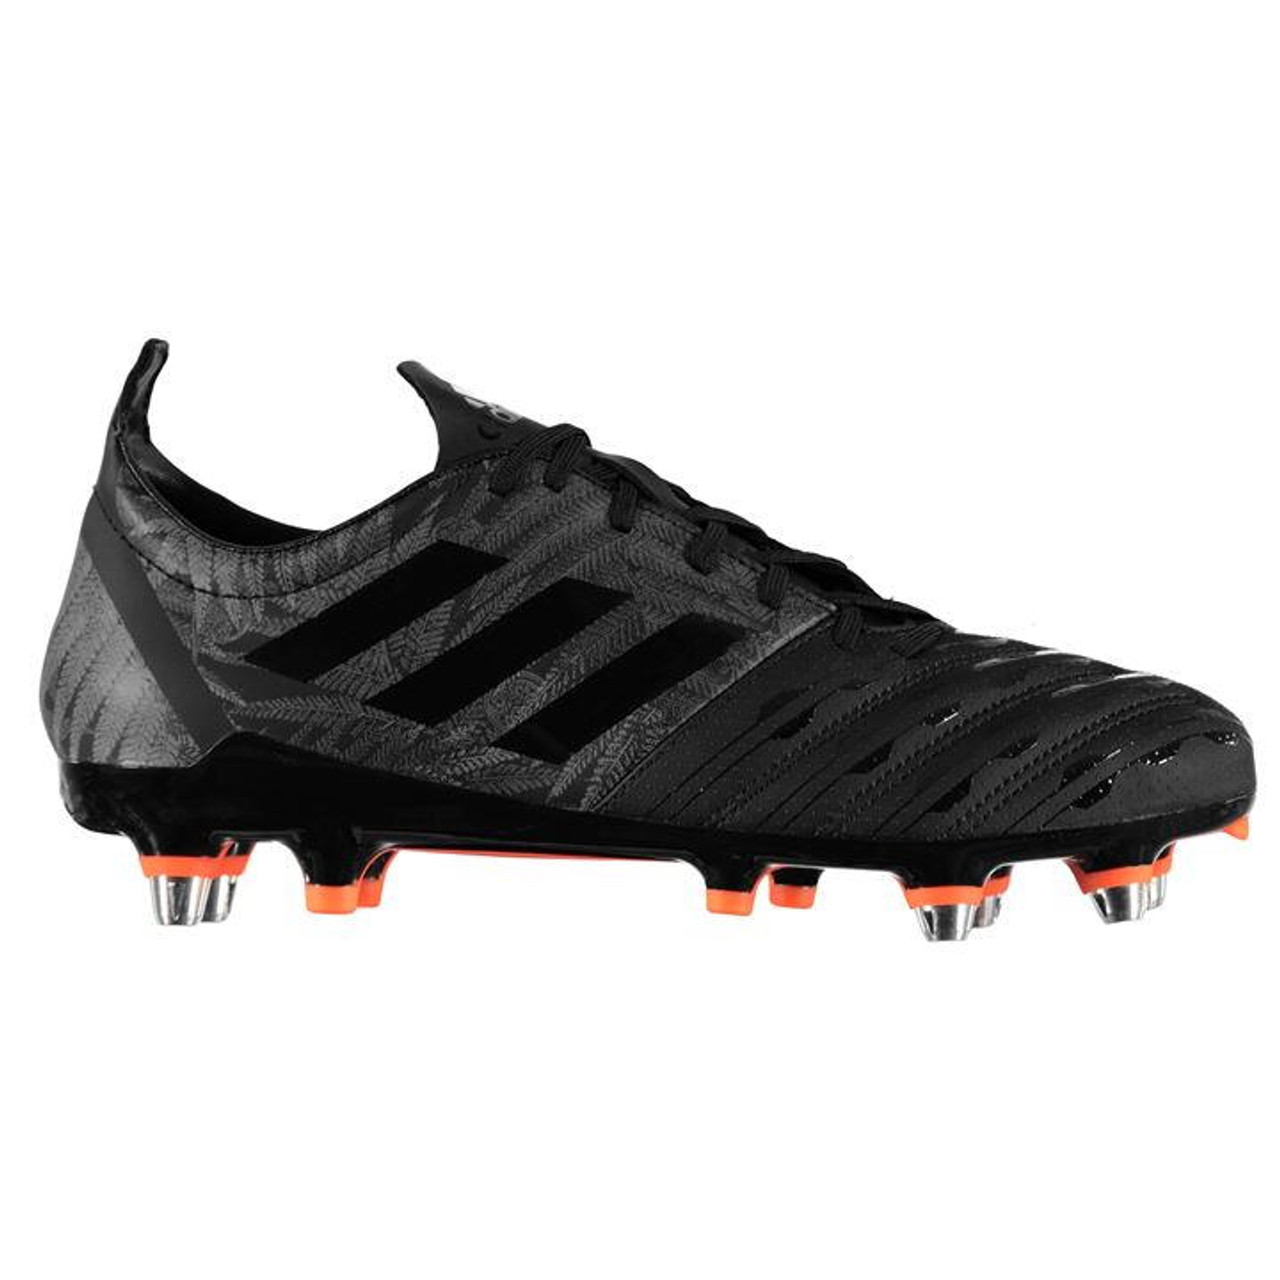 Adidas Malice SG All Blacks Rugby Boots - Black/Orange on sale at Rugby  City | 79.99